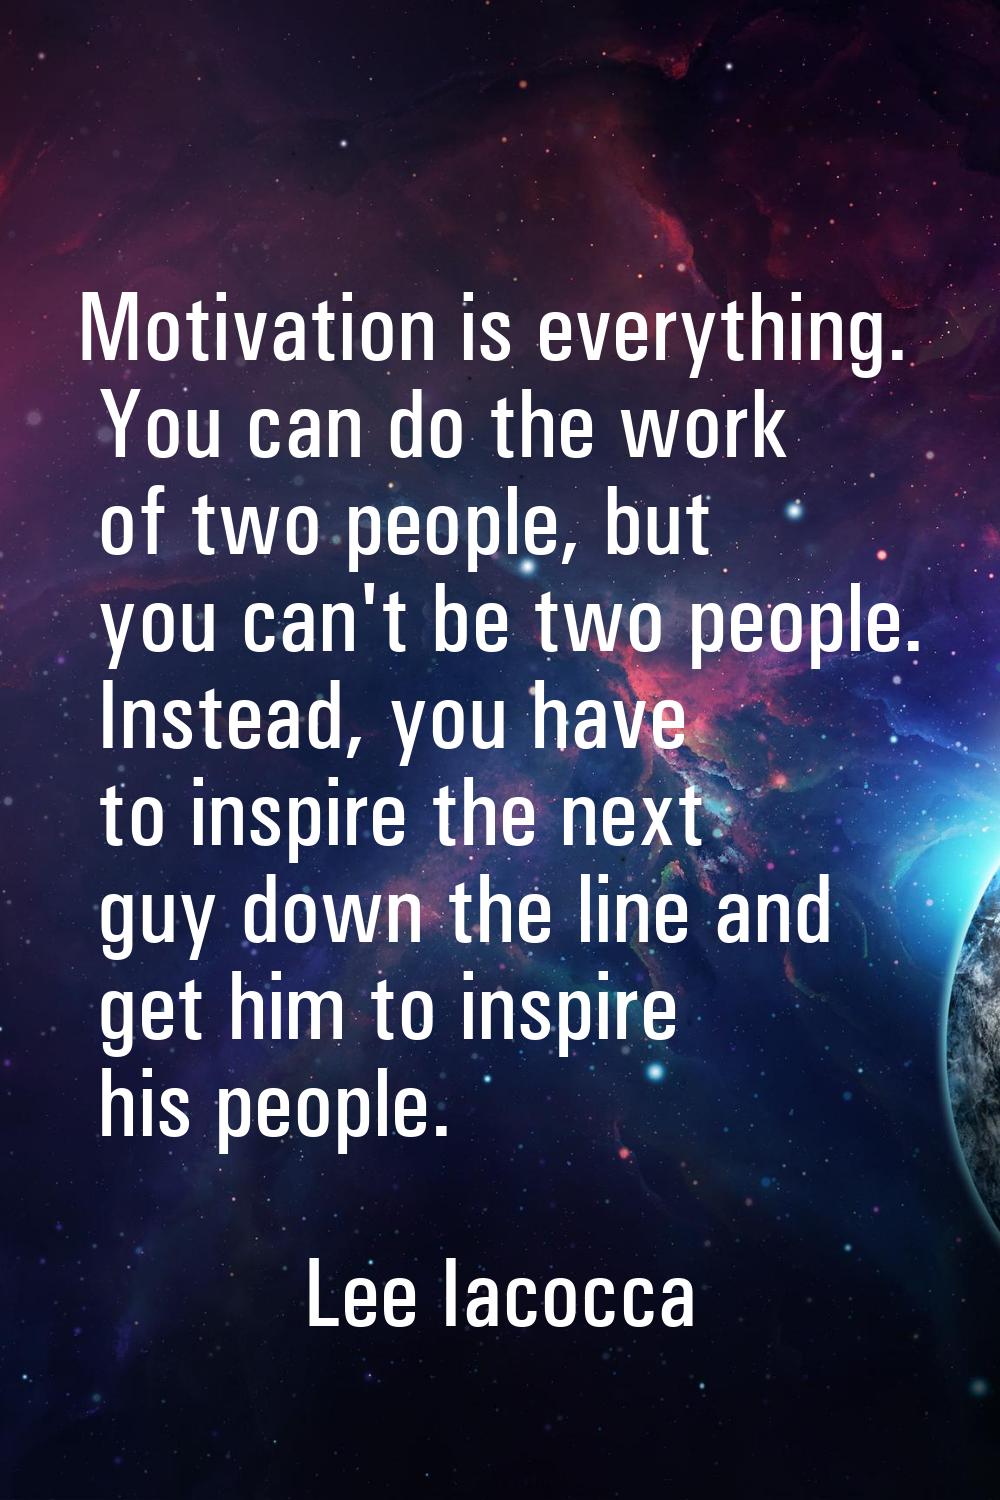 Motivation is everything. You can do the work of two people, but you can't be two people. Instead, 